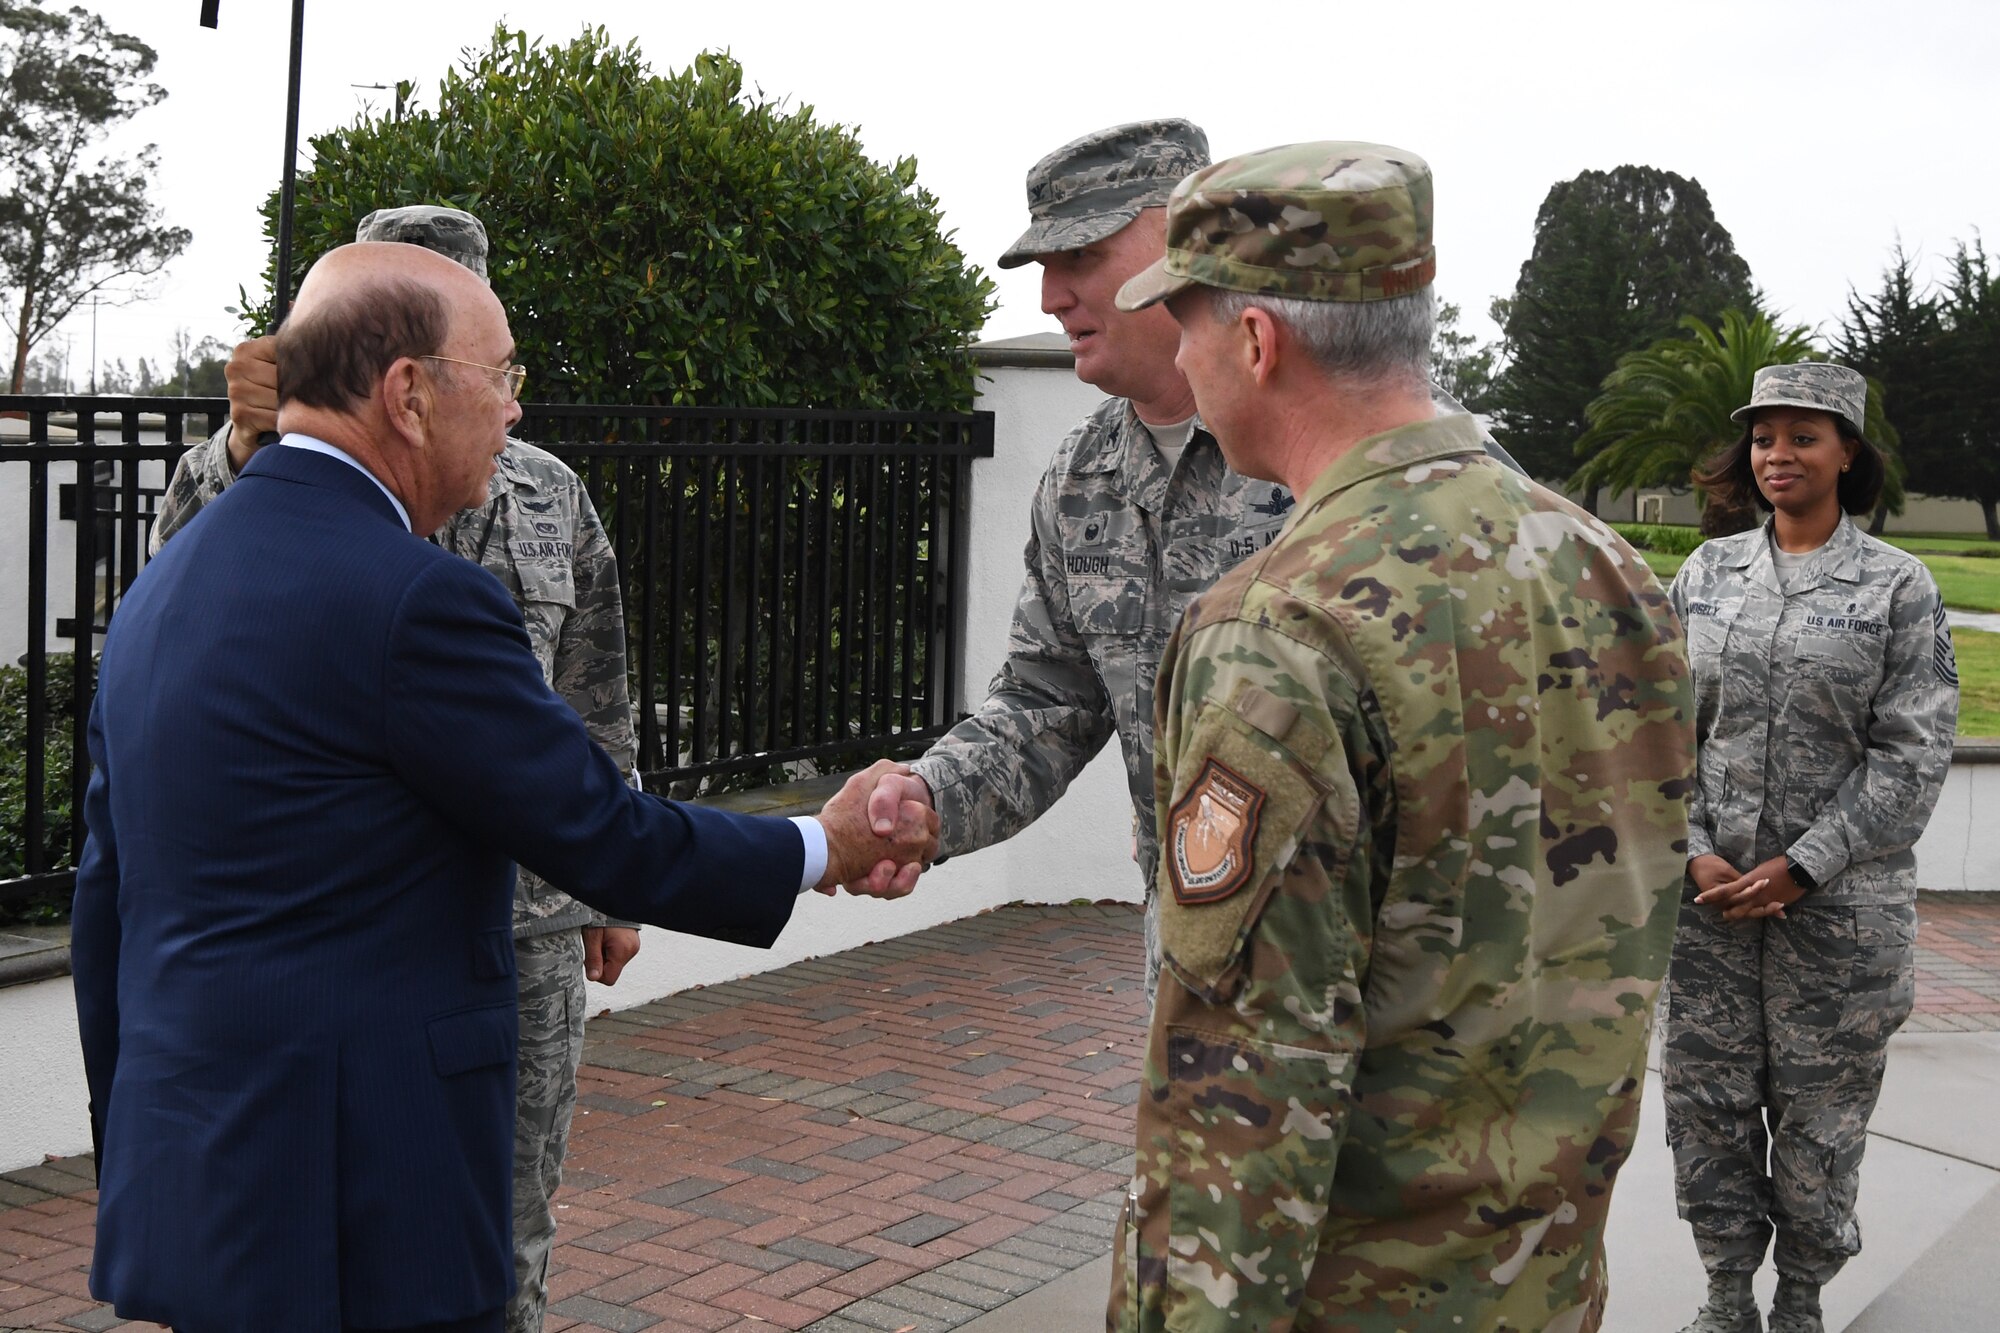 30th Space Wing Commander Col. Michael Hough (center) greets U.S. Secretary of Commerce Wilbur Ross (left) during a visit at Vandenberg AFB, Calif., Nov. 29, 2018. Secretary Ross met with service members from the 18th Space Control Squadron, 30th Space Wing, Combined Space Operations Center, Joint Force Space Component Command and U.S. Strategic Command to discuss Space Situational Awareness capabilities and space operations during a visit here Nov. 29-30. Secretary Ross also spoke with service members about the Department of Defense transitioning non-military aspects of Space Situational Awareness and space safety monitoring and responsibilities to the Department of Commerce. (U.S. Air Force photo by Maj. Cody Chiles)